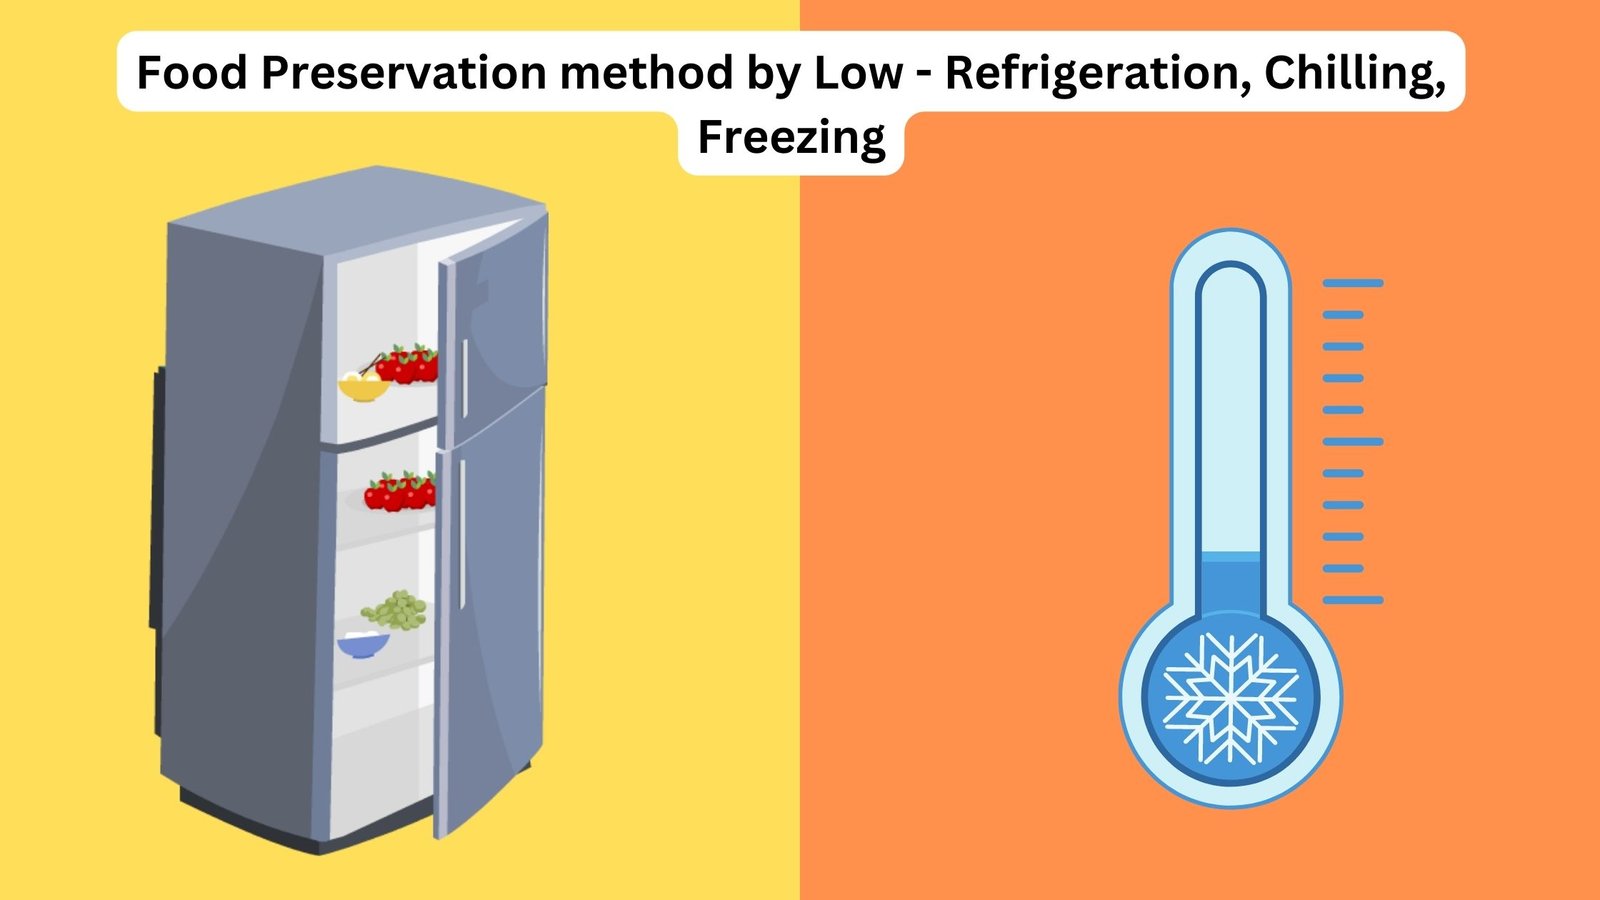 Food Preservation method by Low Temperature - Refrigeration, Chilling, Freezing